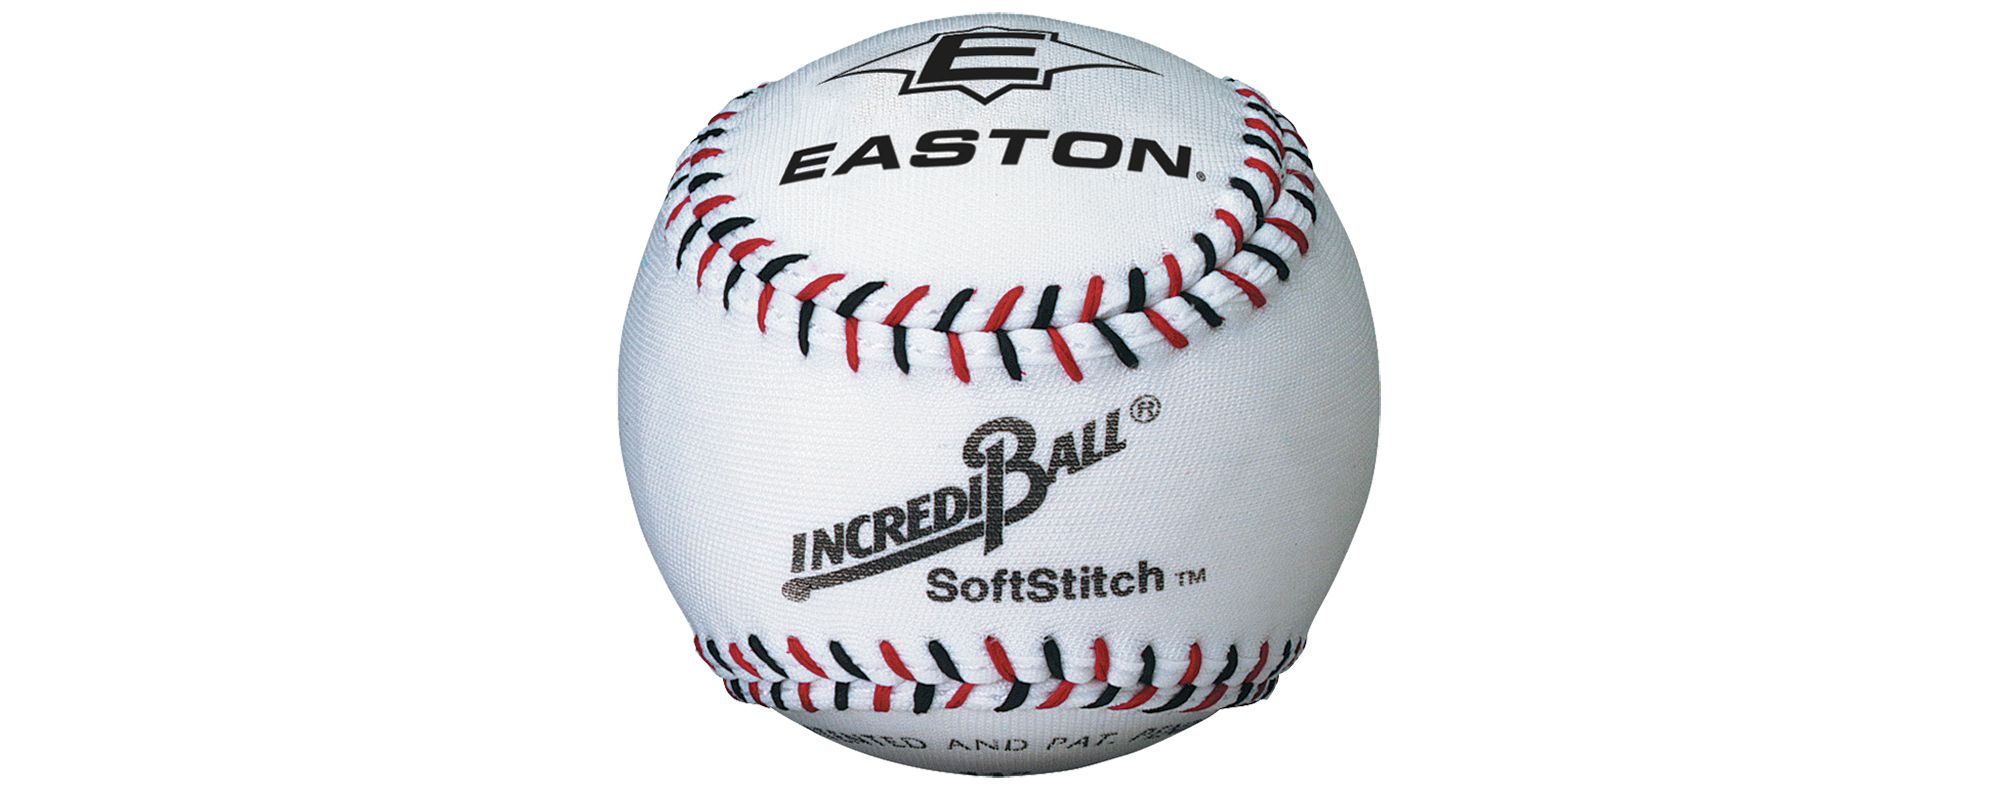 Soft Practice Baseballs Best Baseball Gifts for Youth 2020